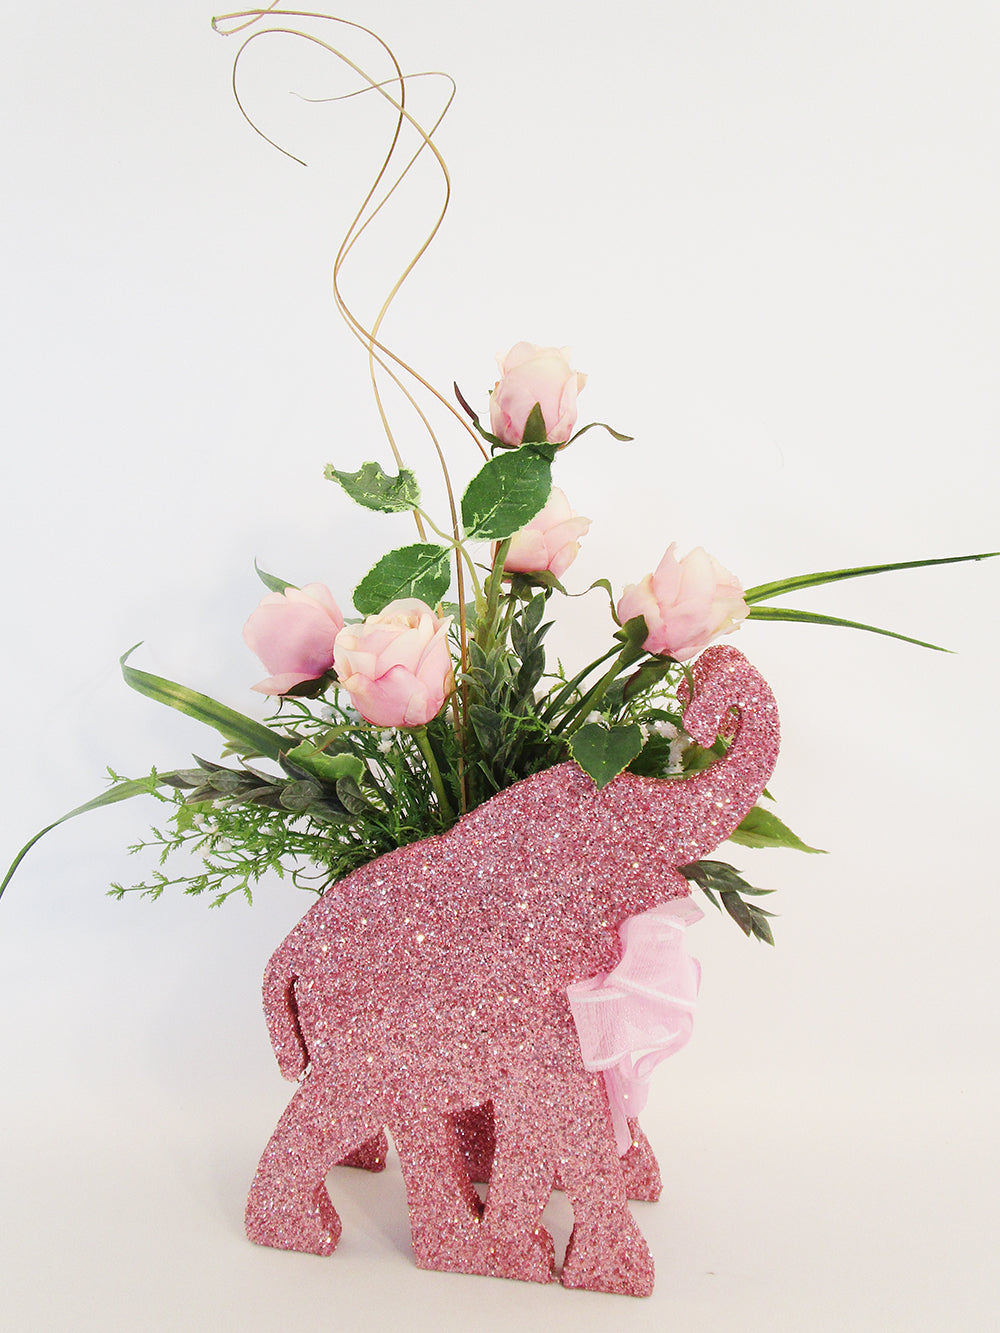 Pink Elephant Floral Centerpiece - Designs by Ginny